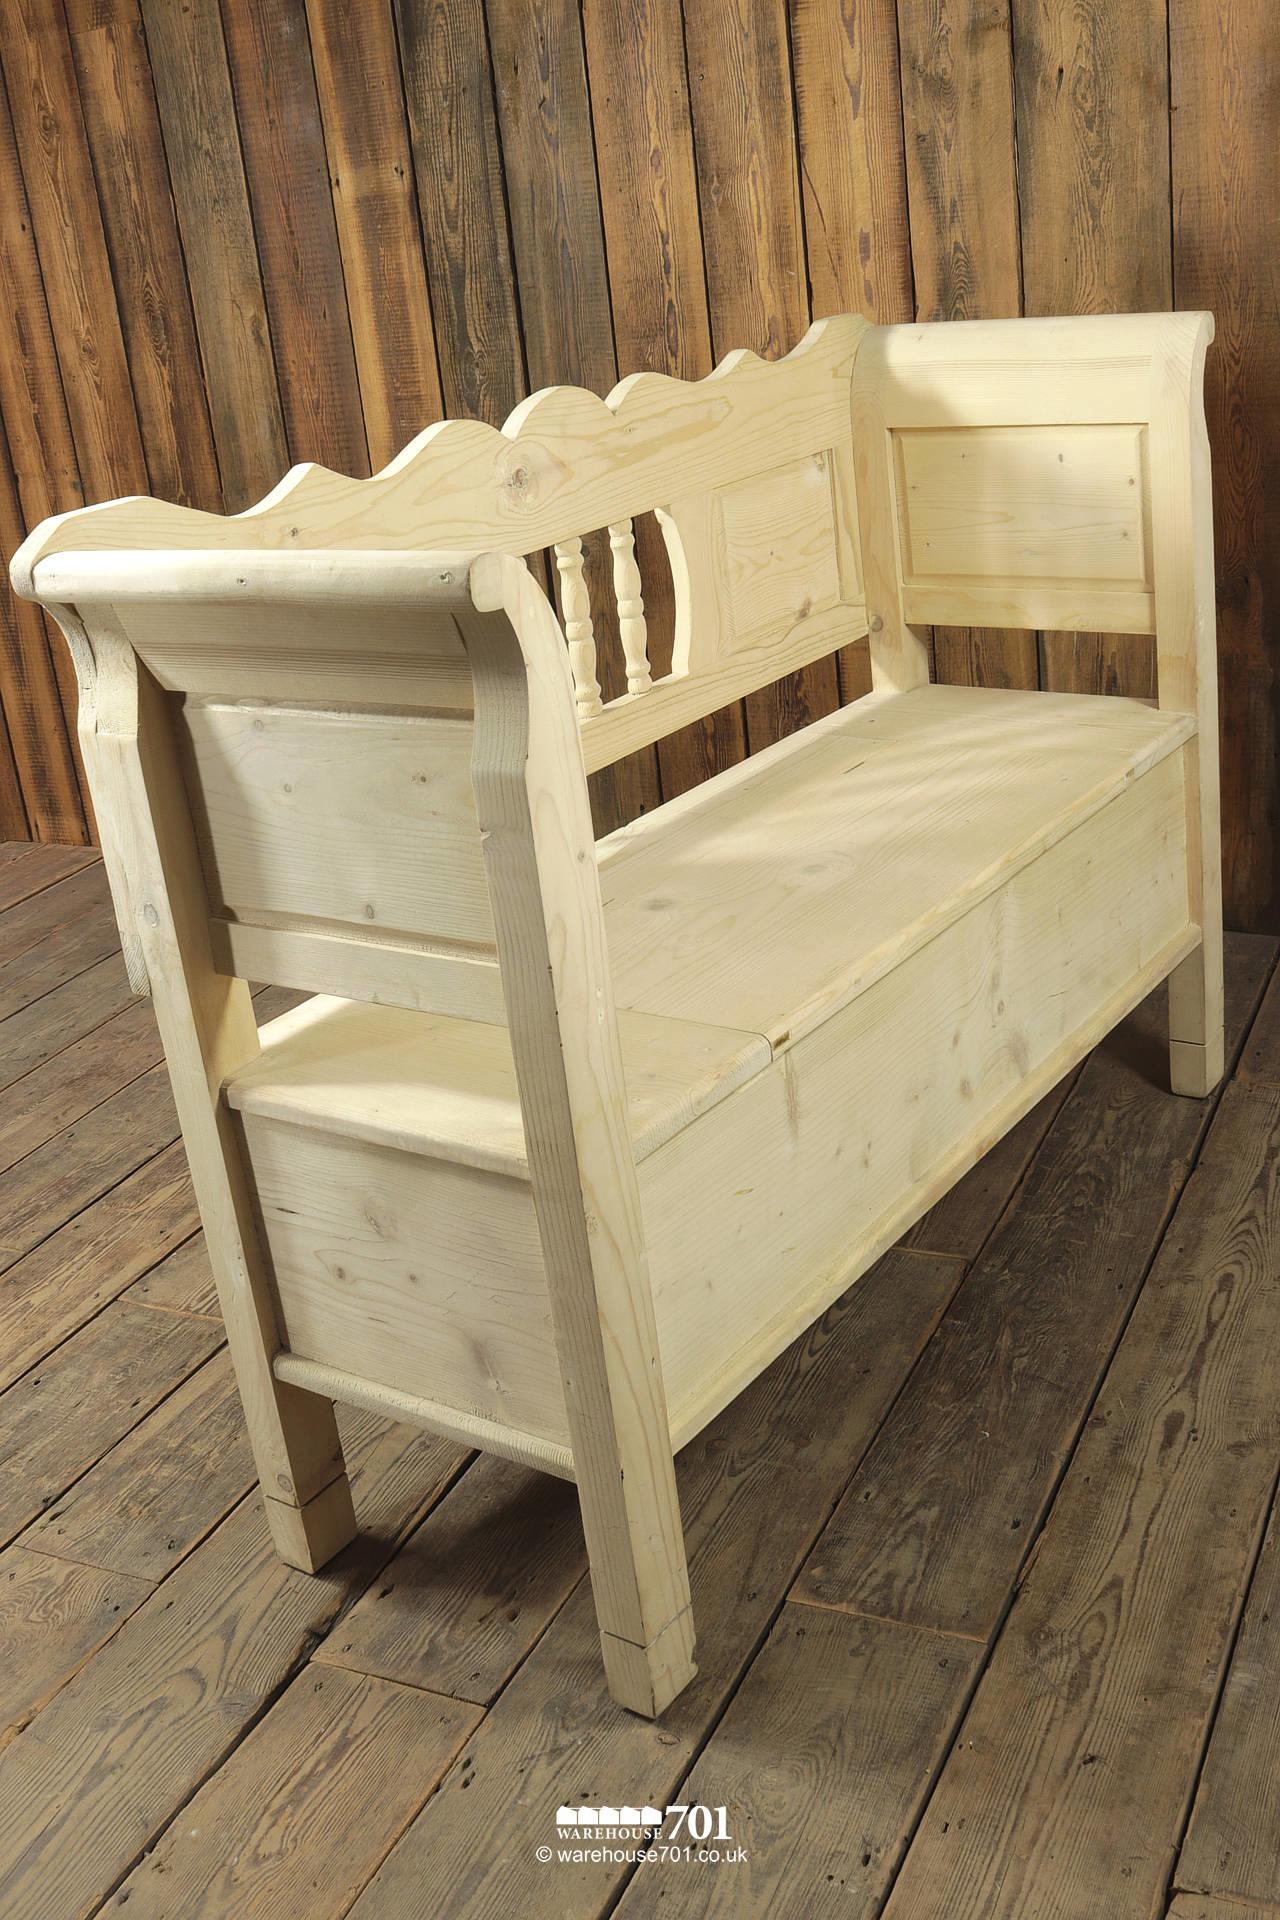 NEW unfinished Two Seat Pine Settle, Bench or Seat with Storage #1